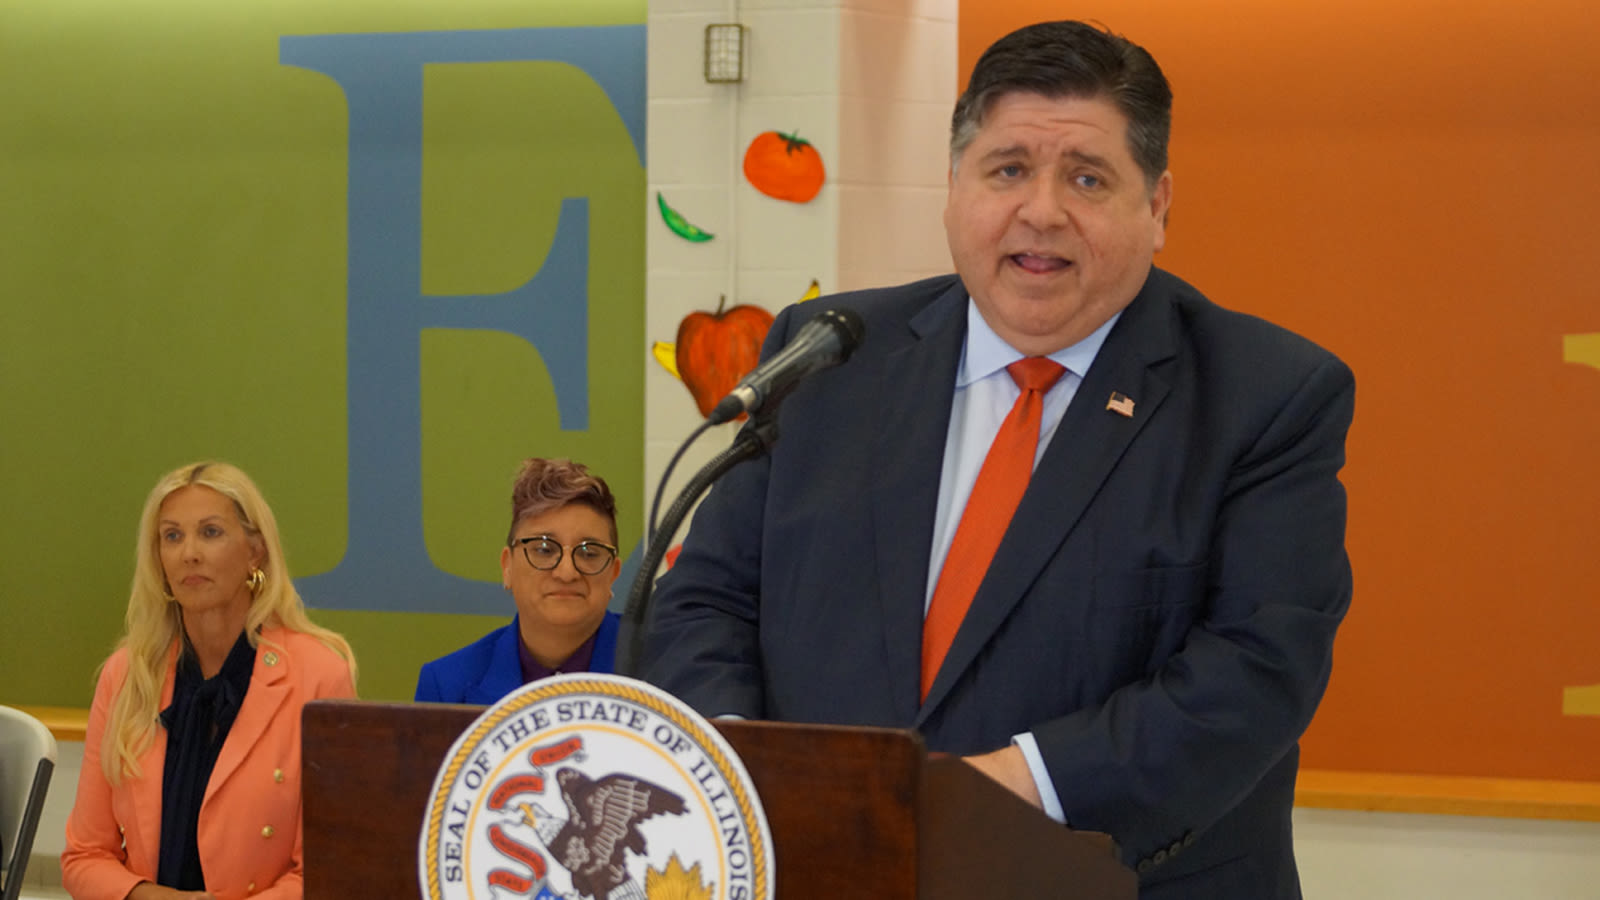 Illinois launches summer food assistance program providing $120 per child, part of federal program